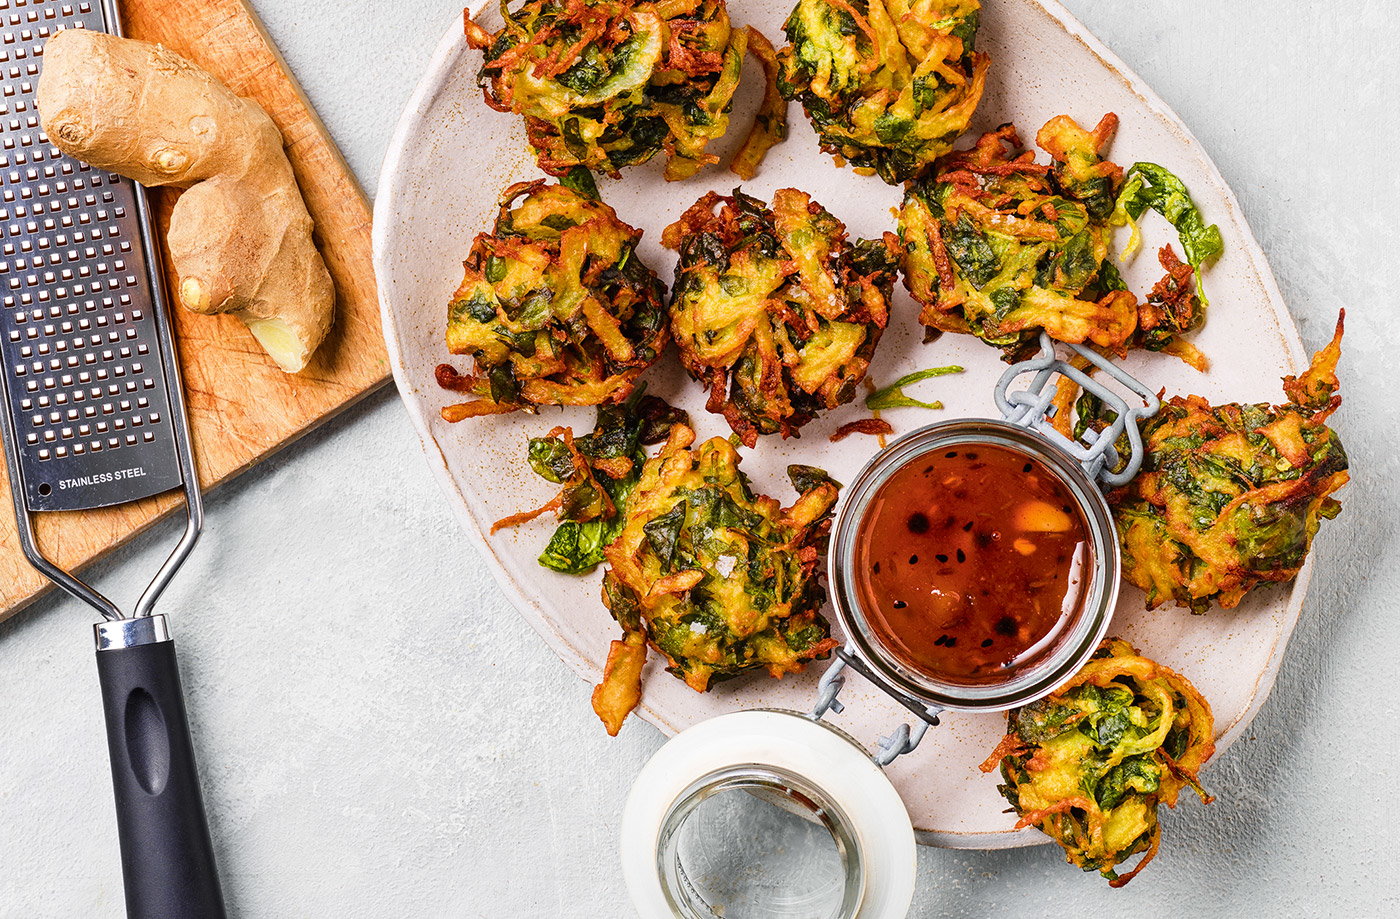 A golden-brown plate of assorted pakoras, showcasing the crispy texture and vibrant colors of the various ingredients.